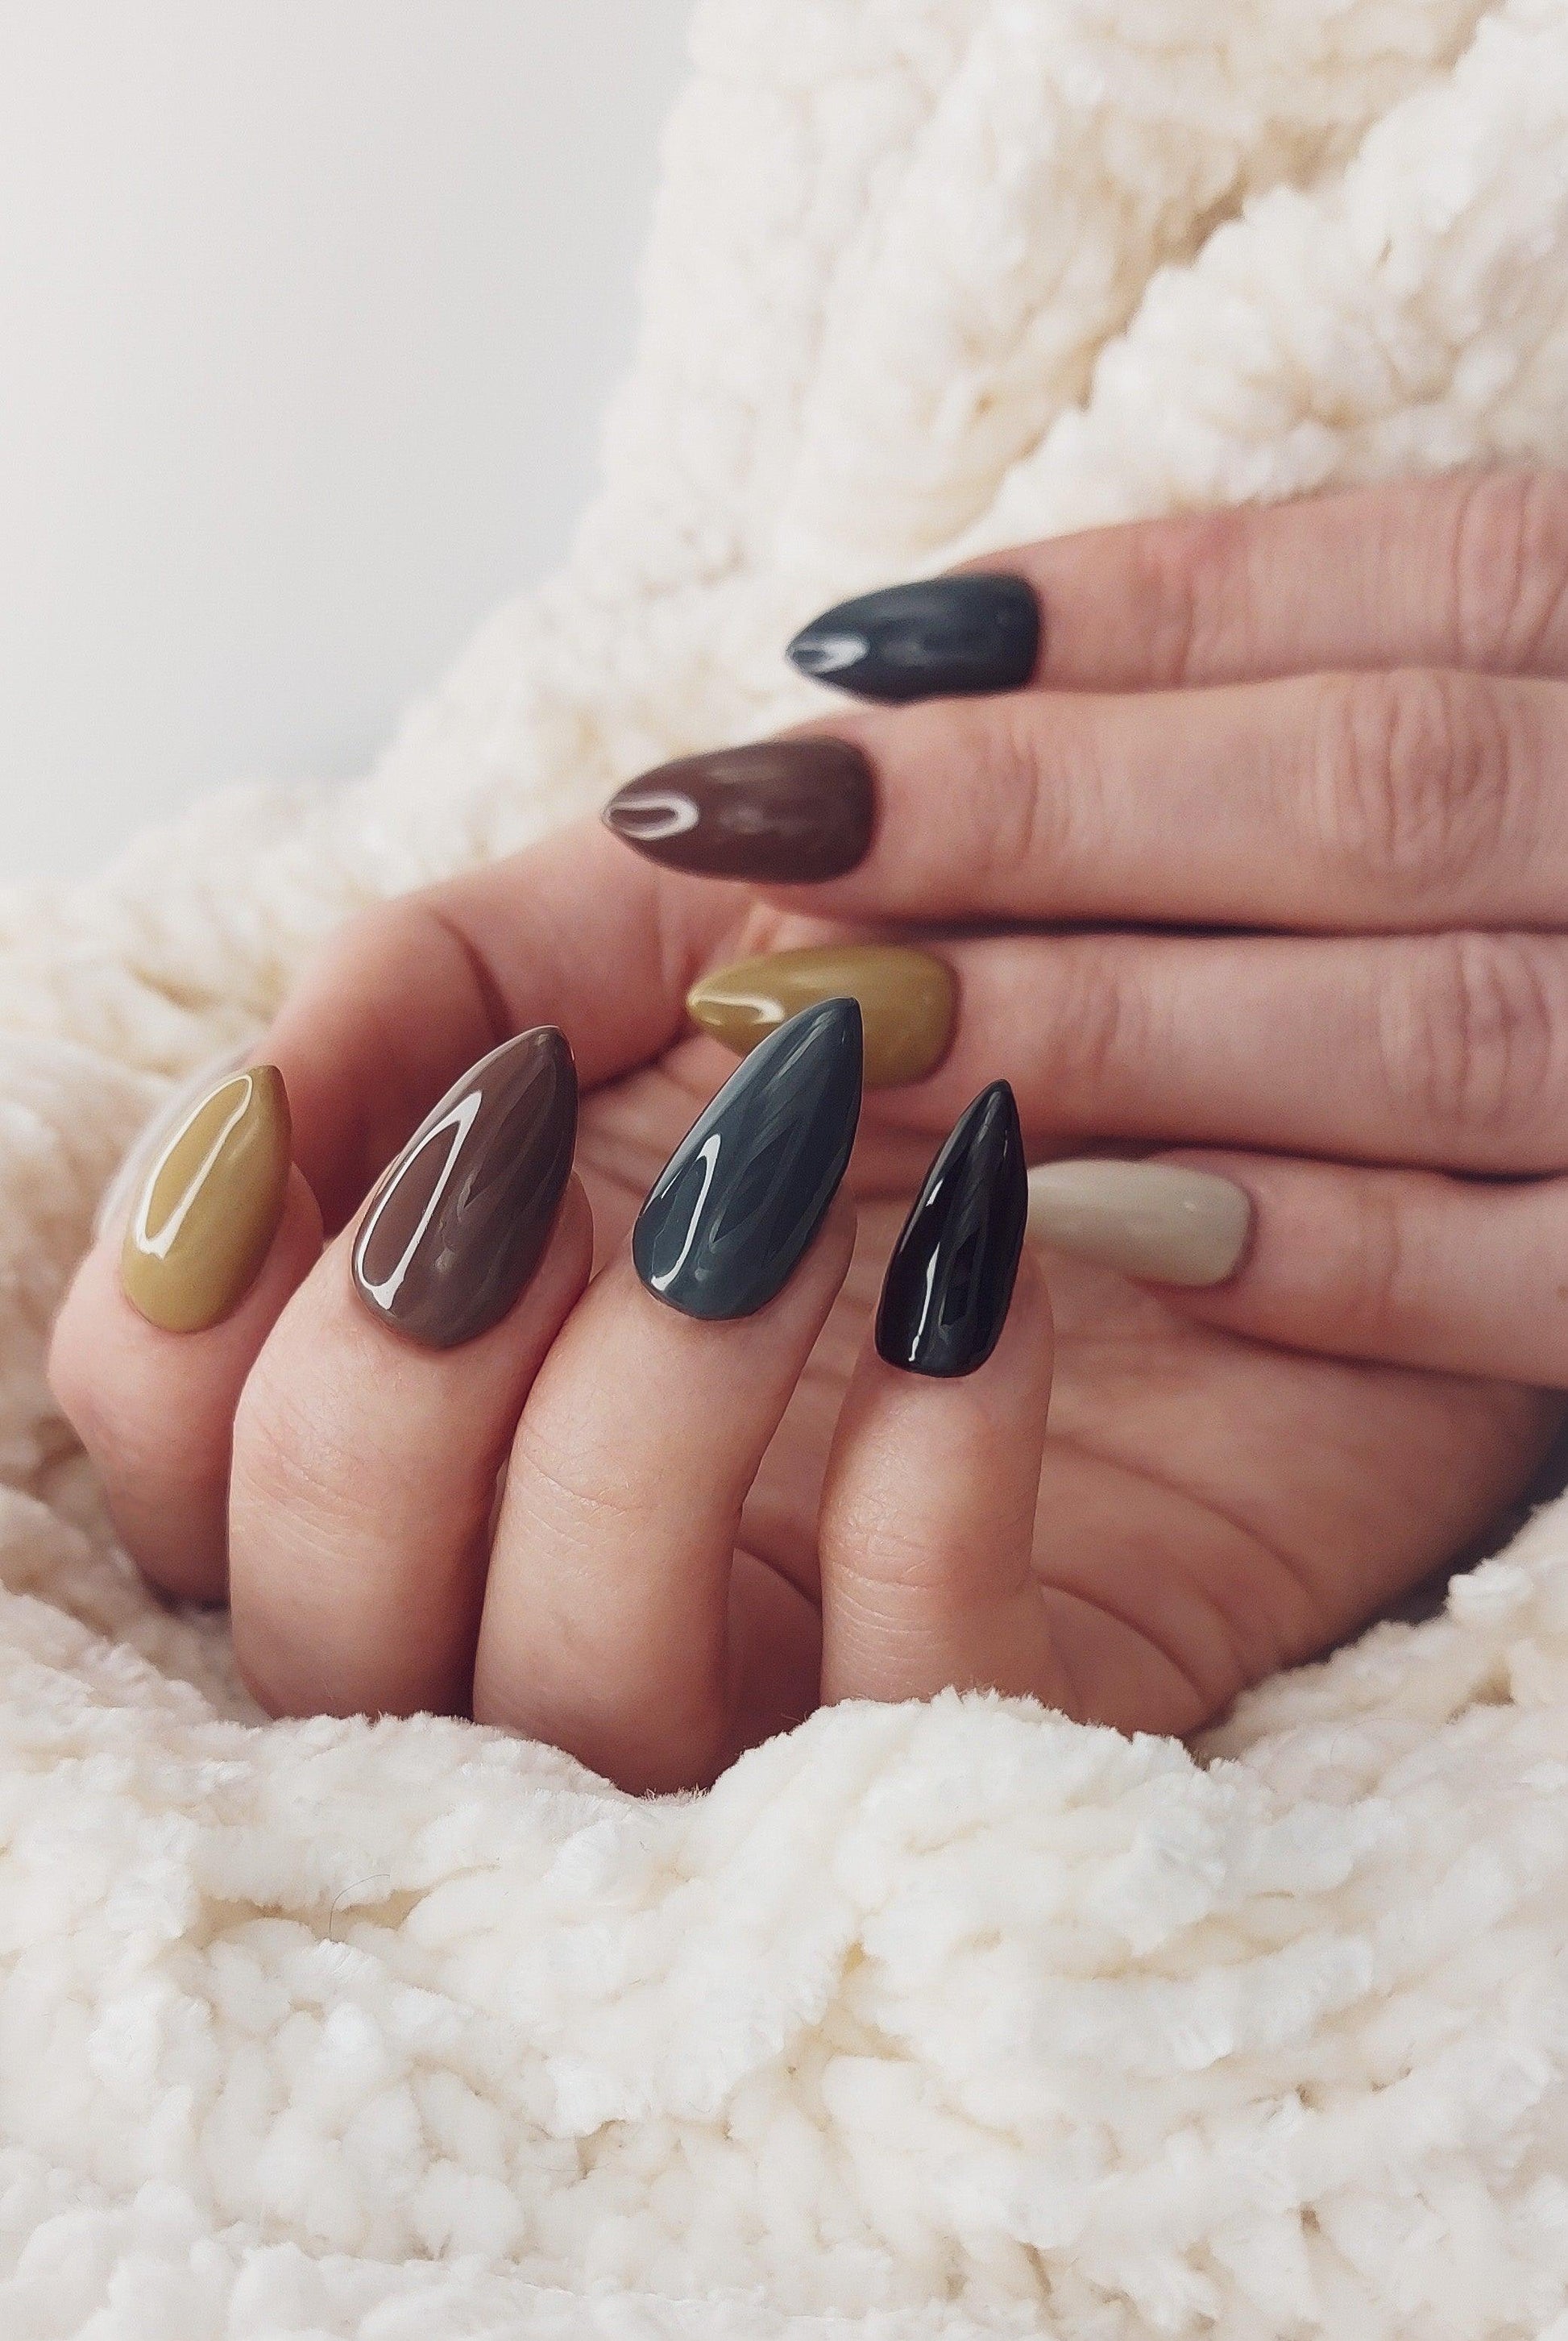 Seasonal Palettes | Fall Inspired Color Palette Press on Nails - FancyB Press-on Nails